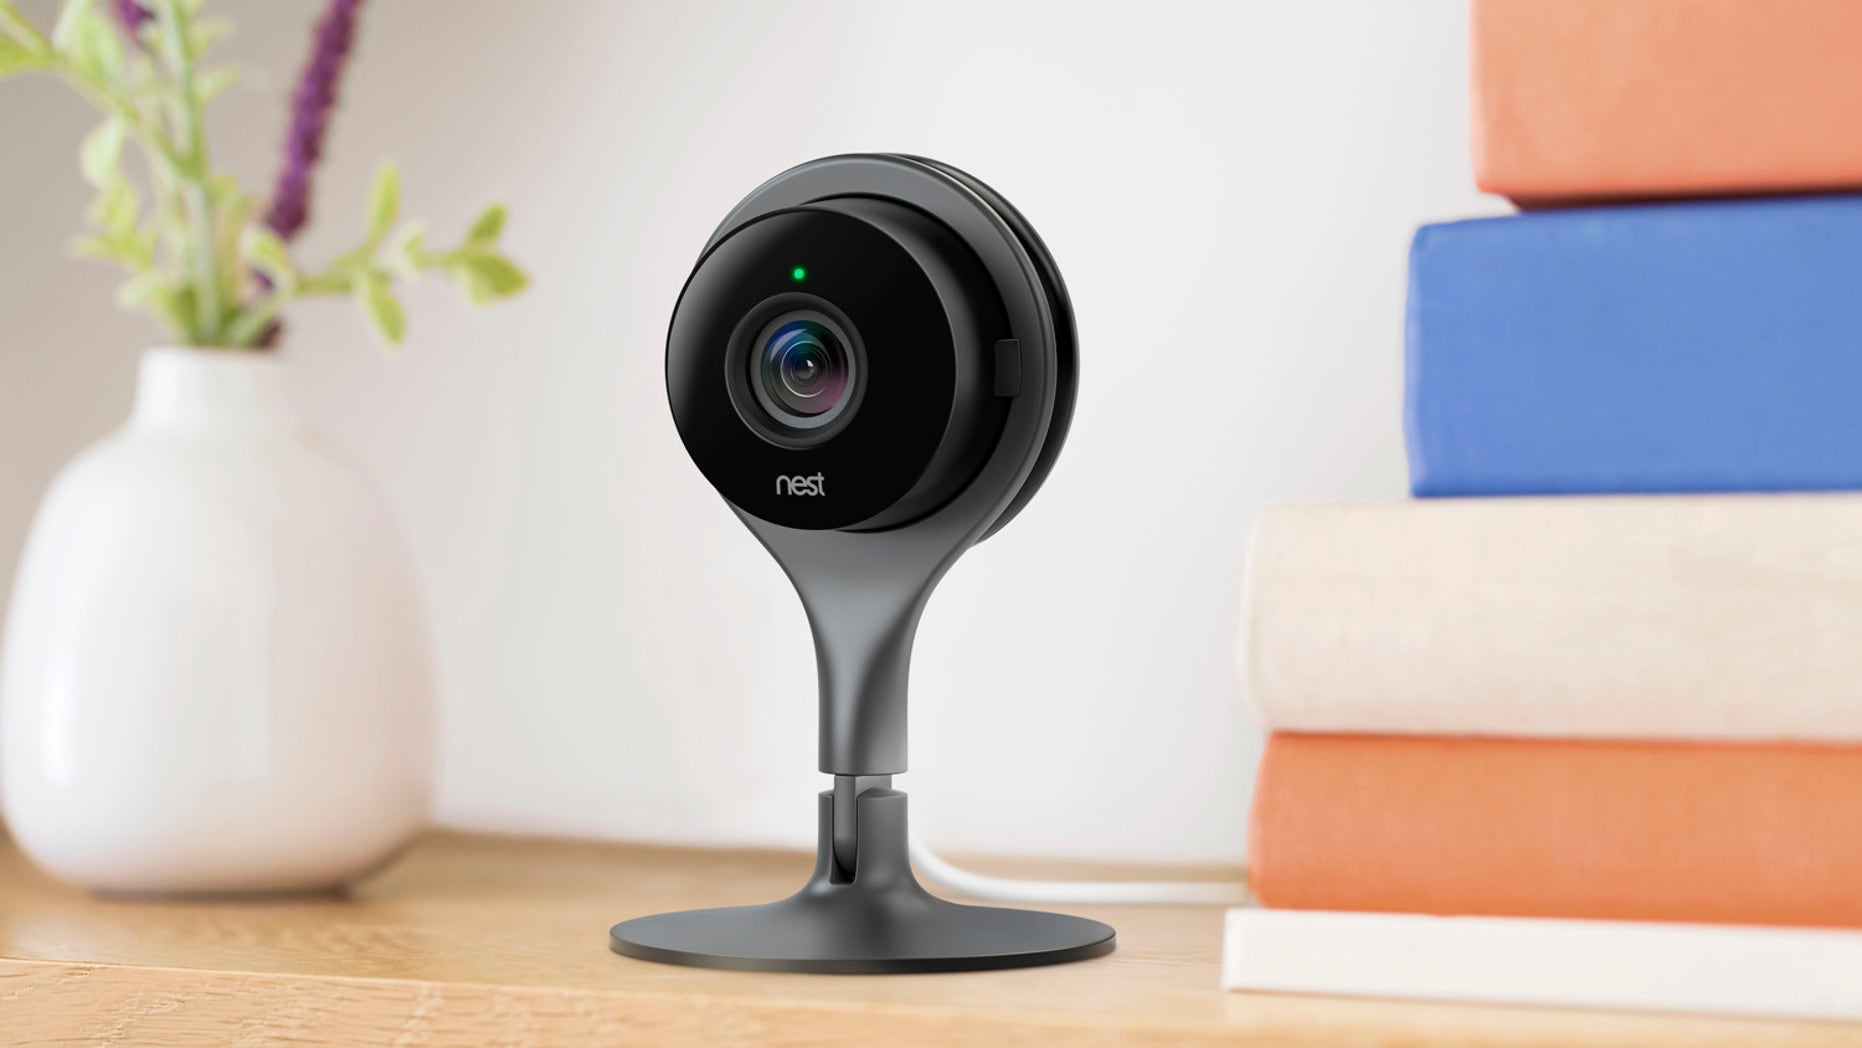 Hacked Nest security cameras watch Illinois family, hurl obscenities, as company blames ‘compromised passwords’